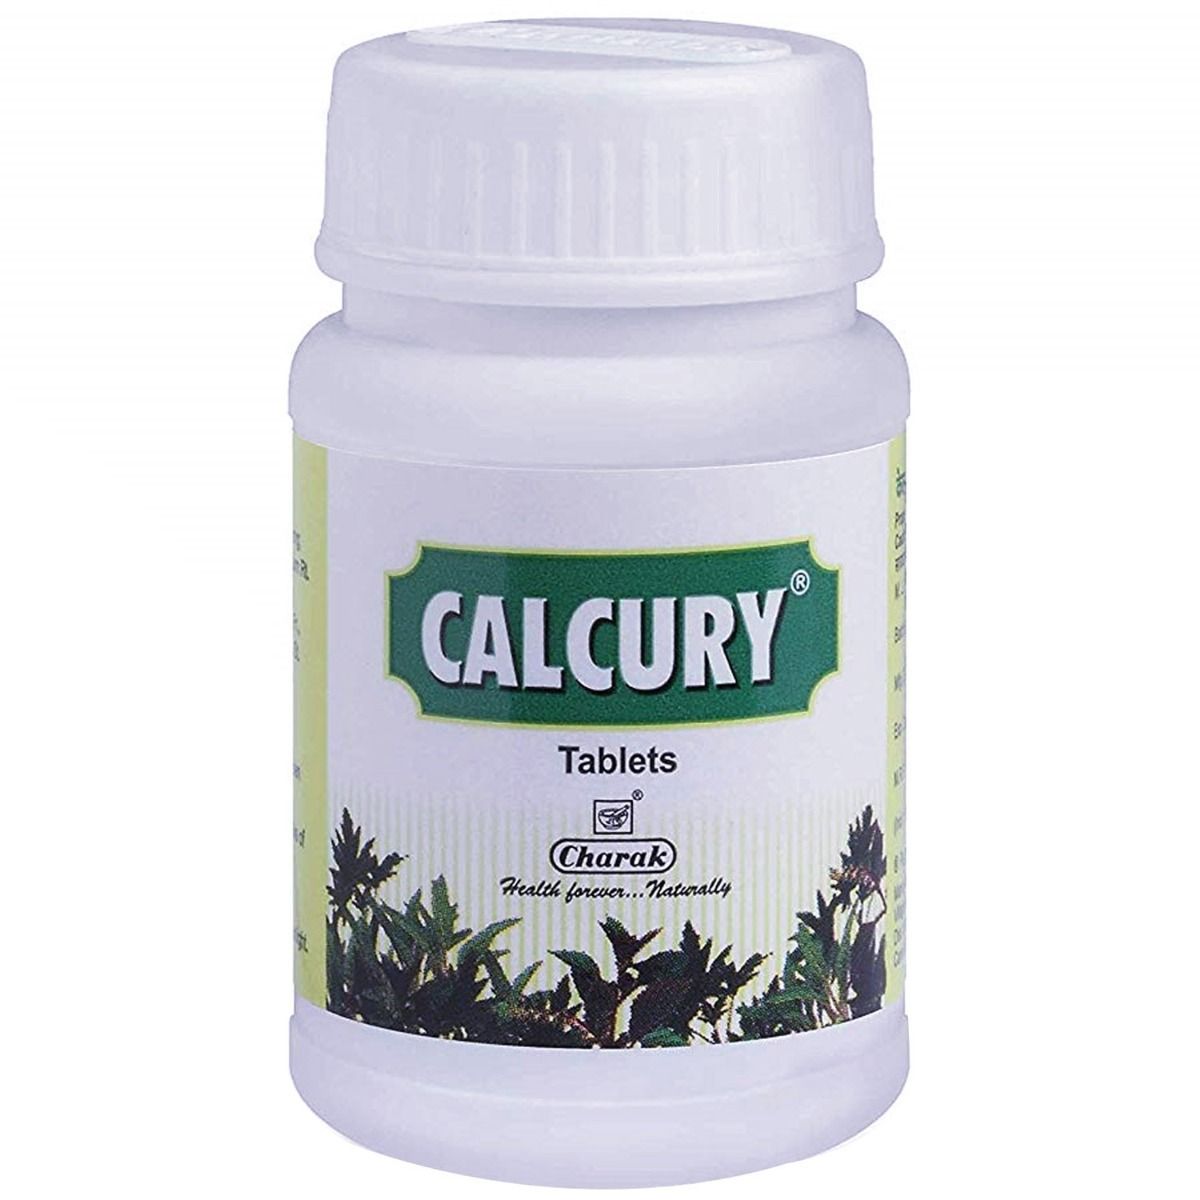 Buy Calcury, 40 Tablets Online